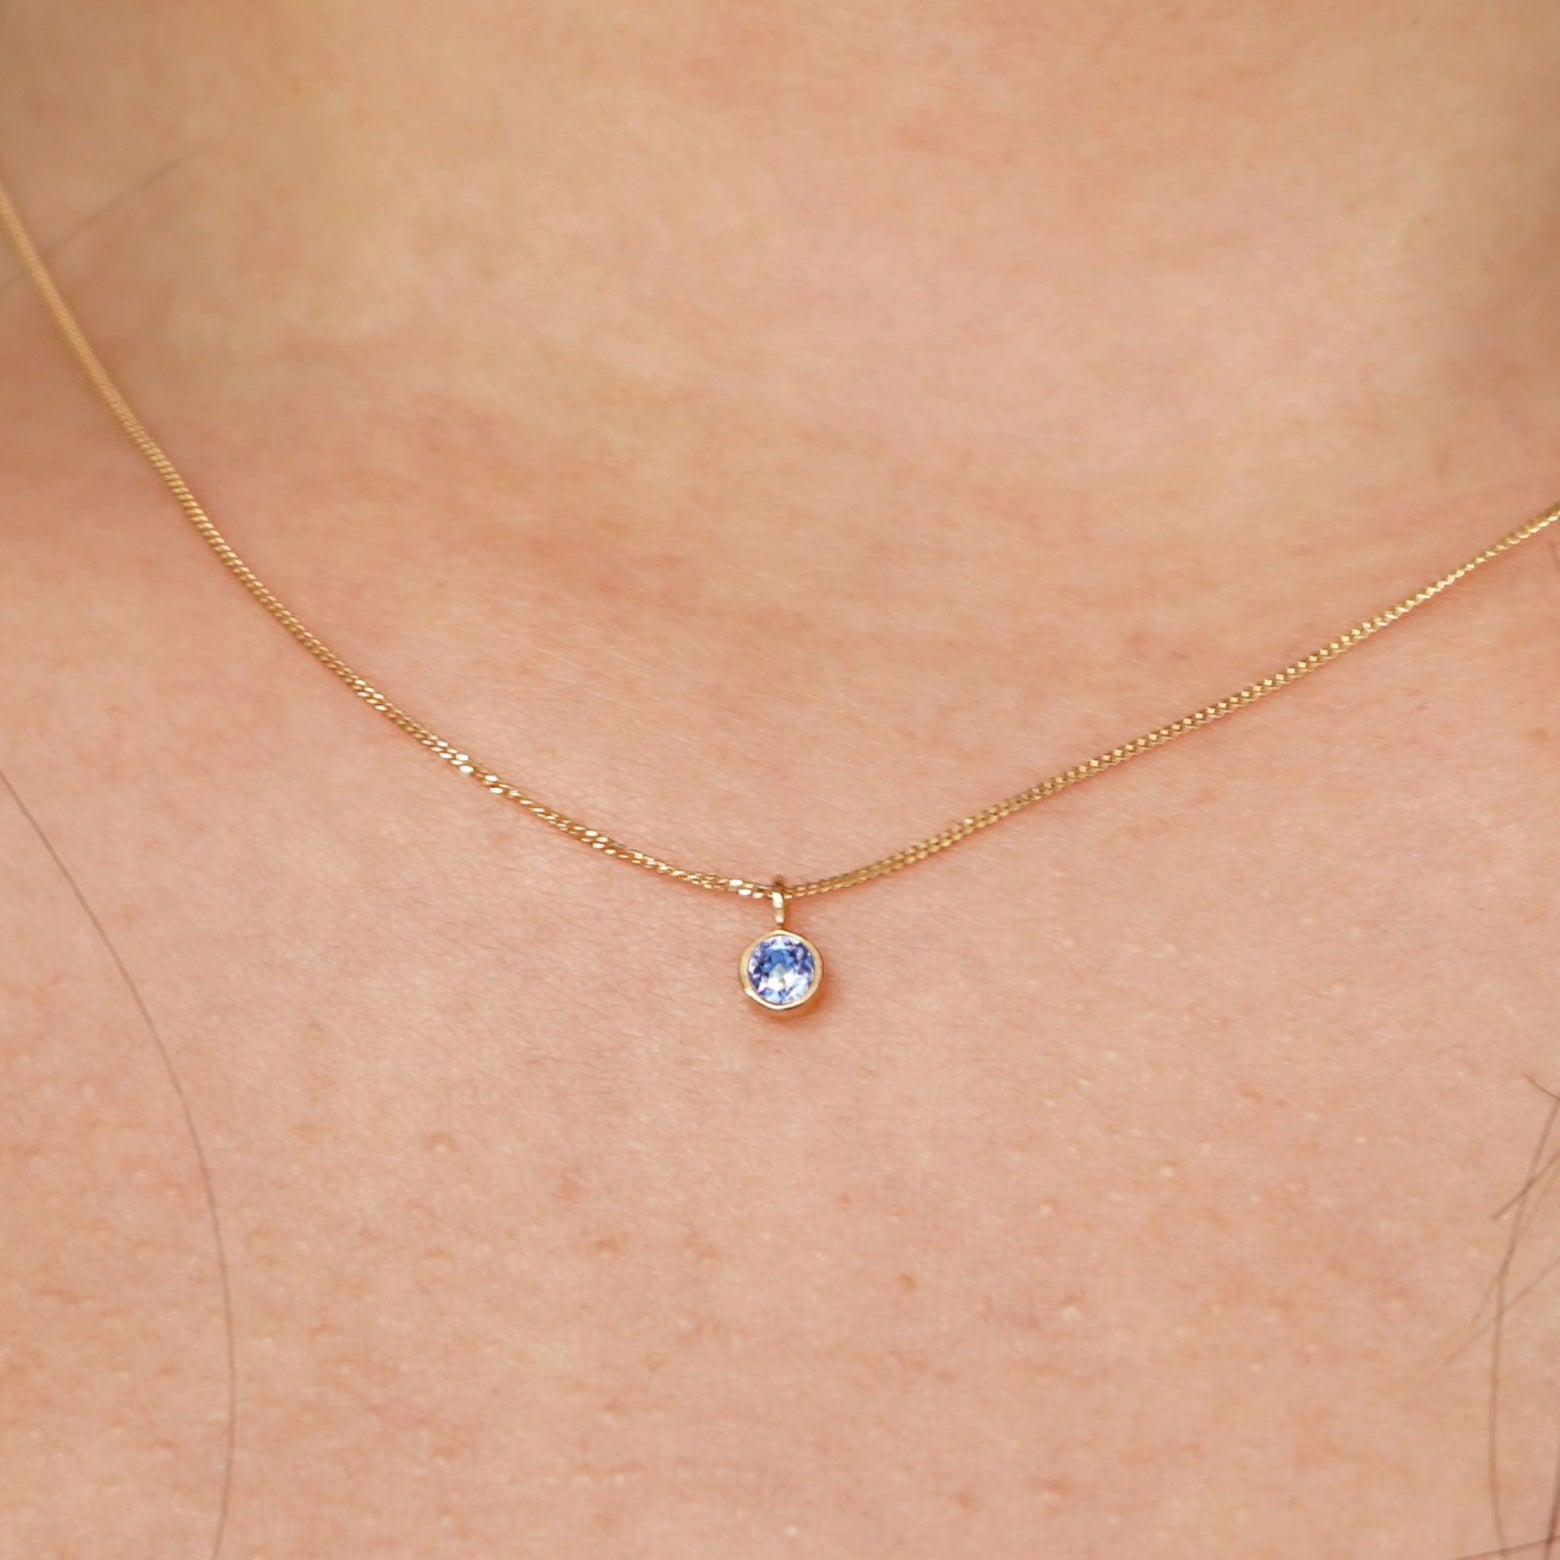 Close up view of a model's neck wearing a solid 14k yellow gold Aquamarine necklace